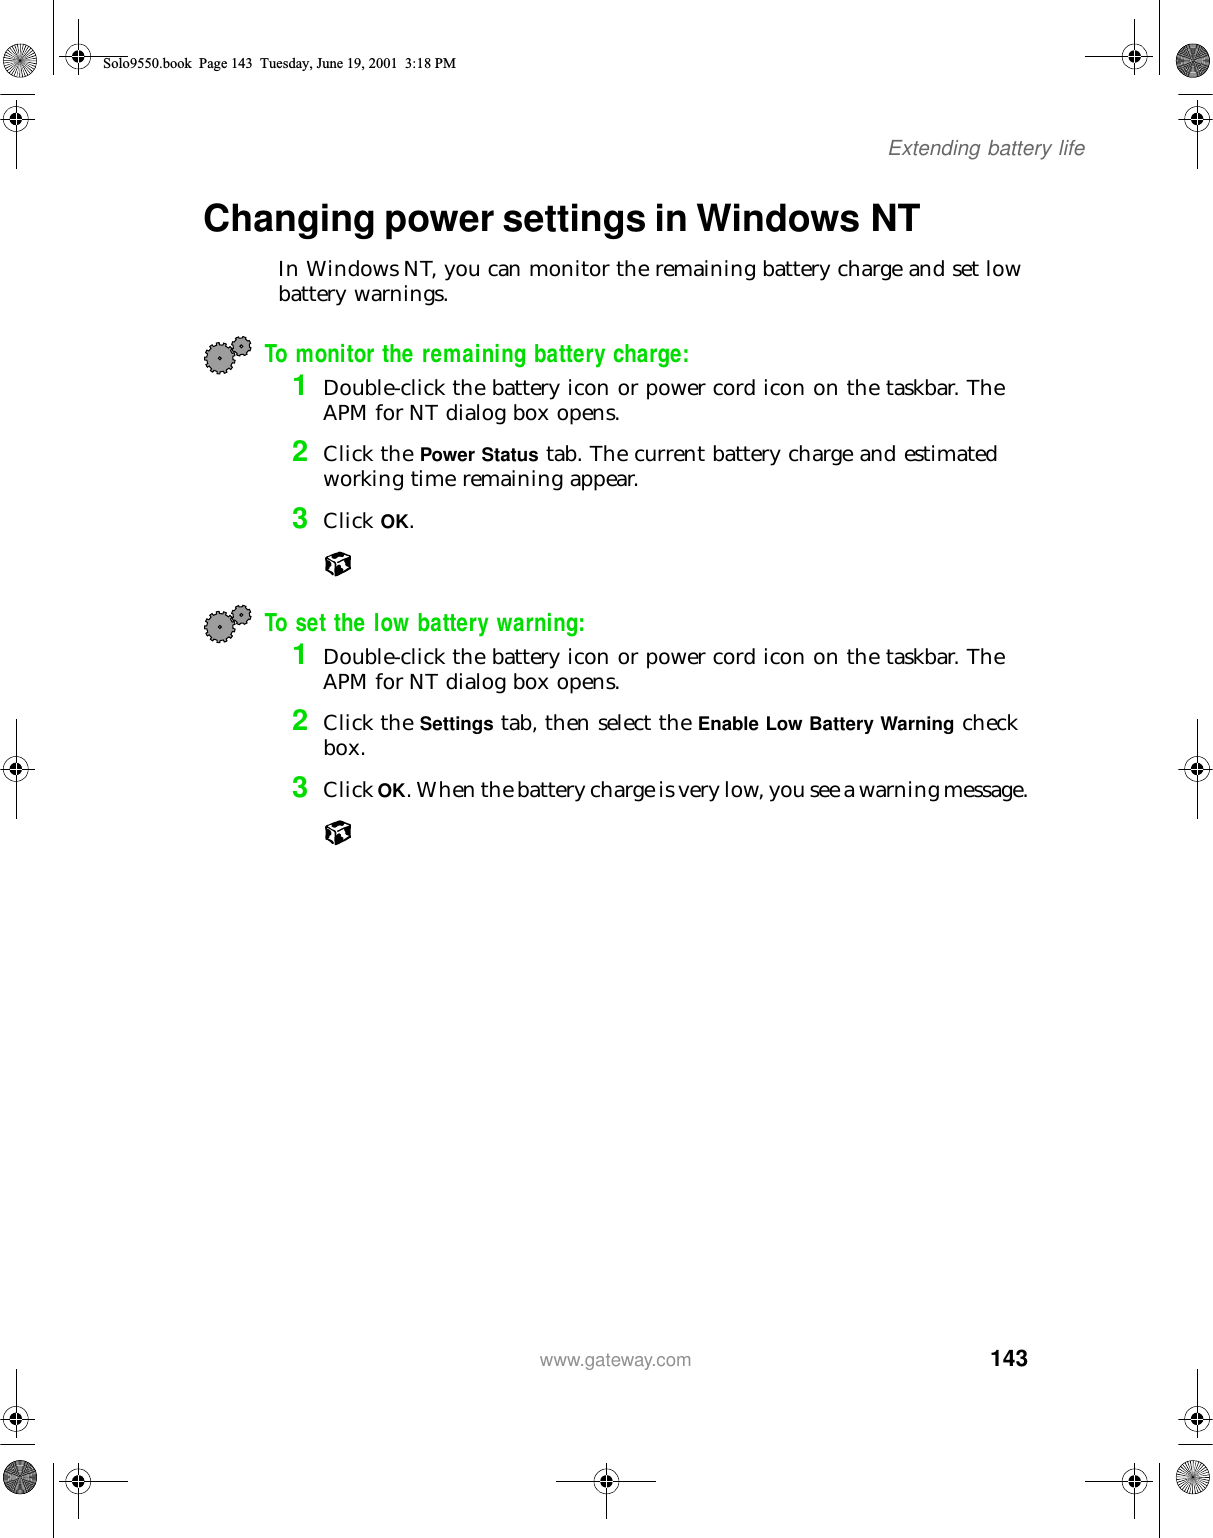 143Extending battery lifewww.gateway.comChanging power settings in Windows NT In Windows NT, you can monitor the remaining battery charge and set low battery warnings.To monitor the remaining battery charge:1Double-click the battery icon or power cord icon on the taskbar. The APM for NT dialog box opens.2Click the Power Status tab. The current battery charge and estimated working time remaining appear.3Click OK.To set the low battery warning: 1Double-click the battery icon or power cord icon on the taskbar. The APM for NT dialog box opens.2Click the Settings tab, then select the Enable Low Battery Warning check box.3Click OK. When the battery charge is very low, you see a warning message.Solo9550.book Page 143 Tuesday, June 19, 2001 3:18 PM